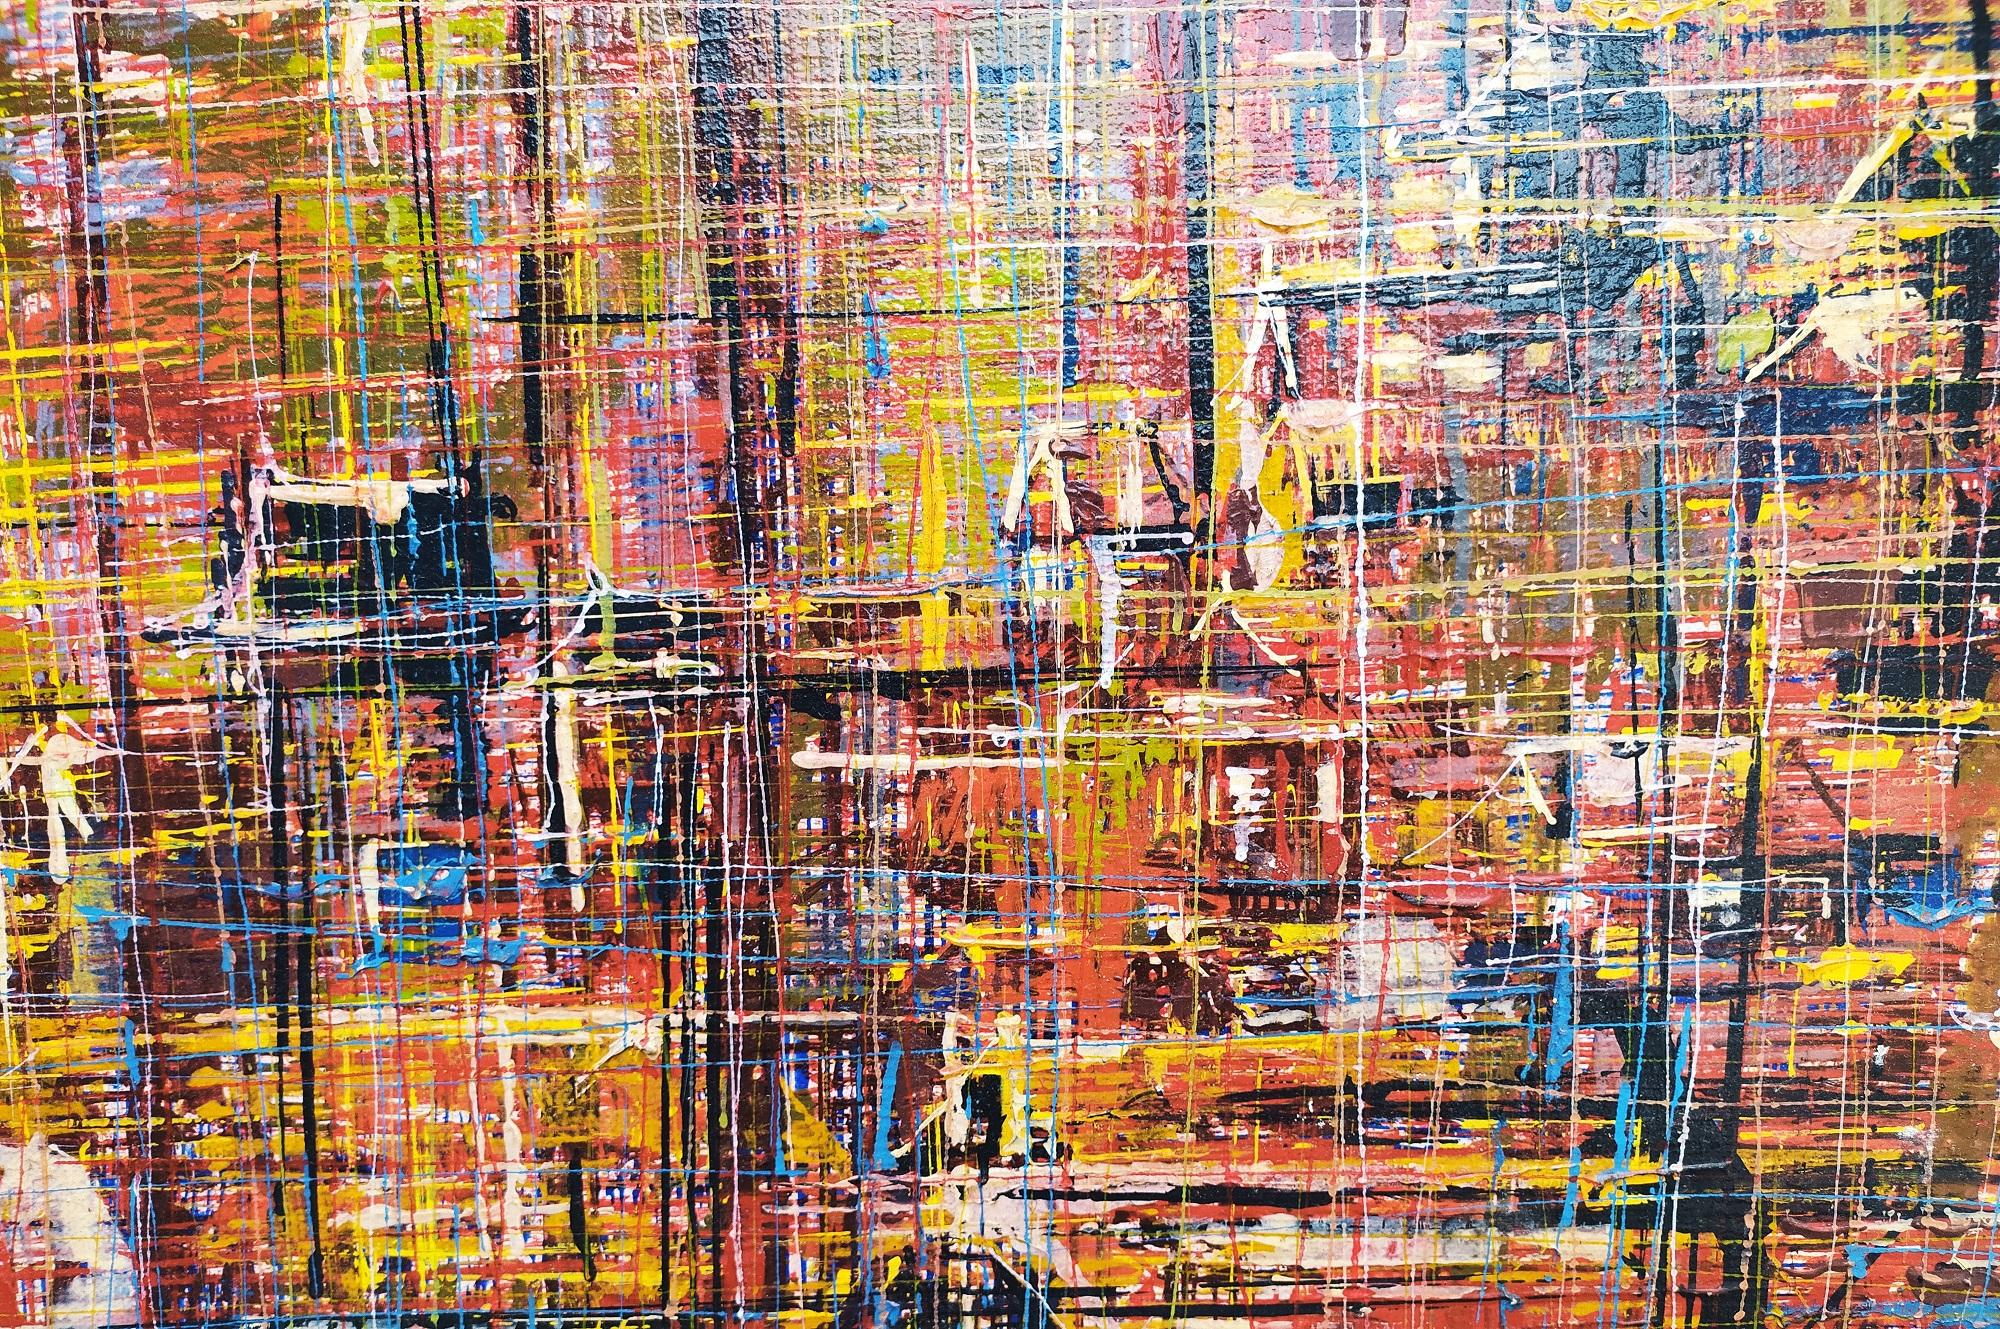 Vertical Harmony - Painting by Ahmad Alwi